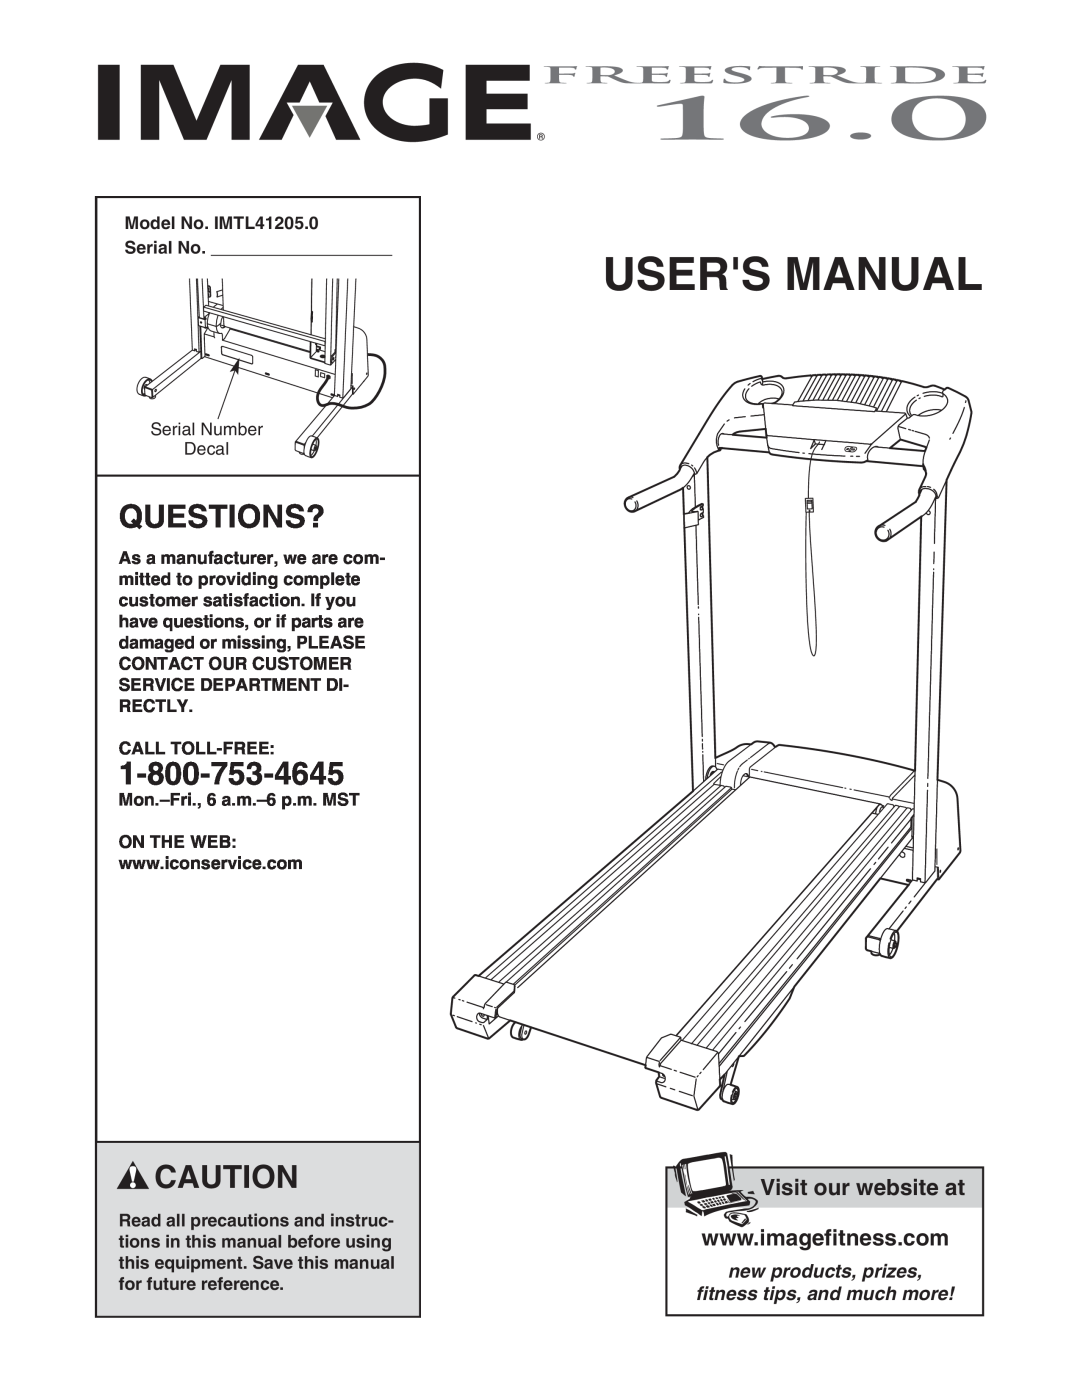 Image IMTL41205.0 user manual Questions?, Users Manual, Visit our website at 